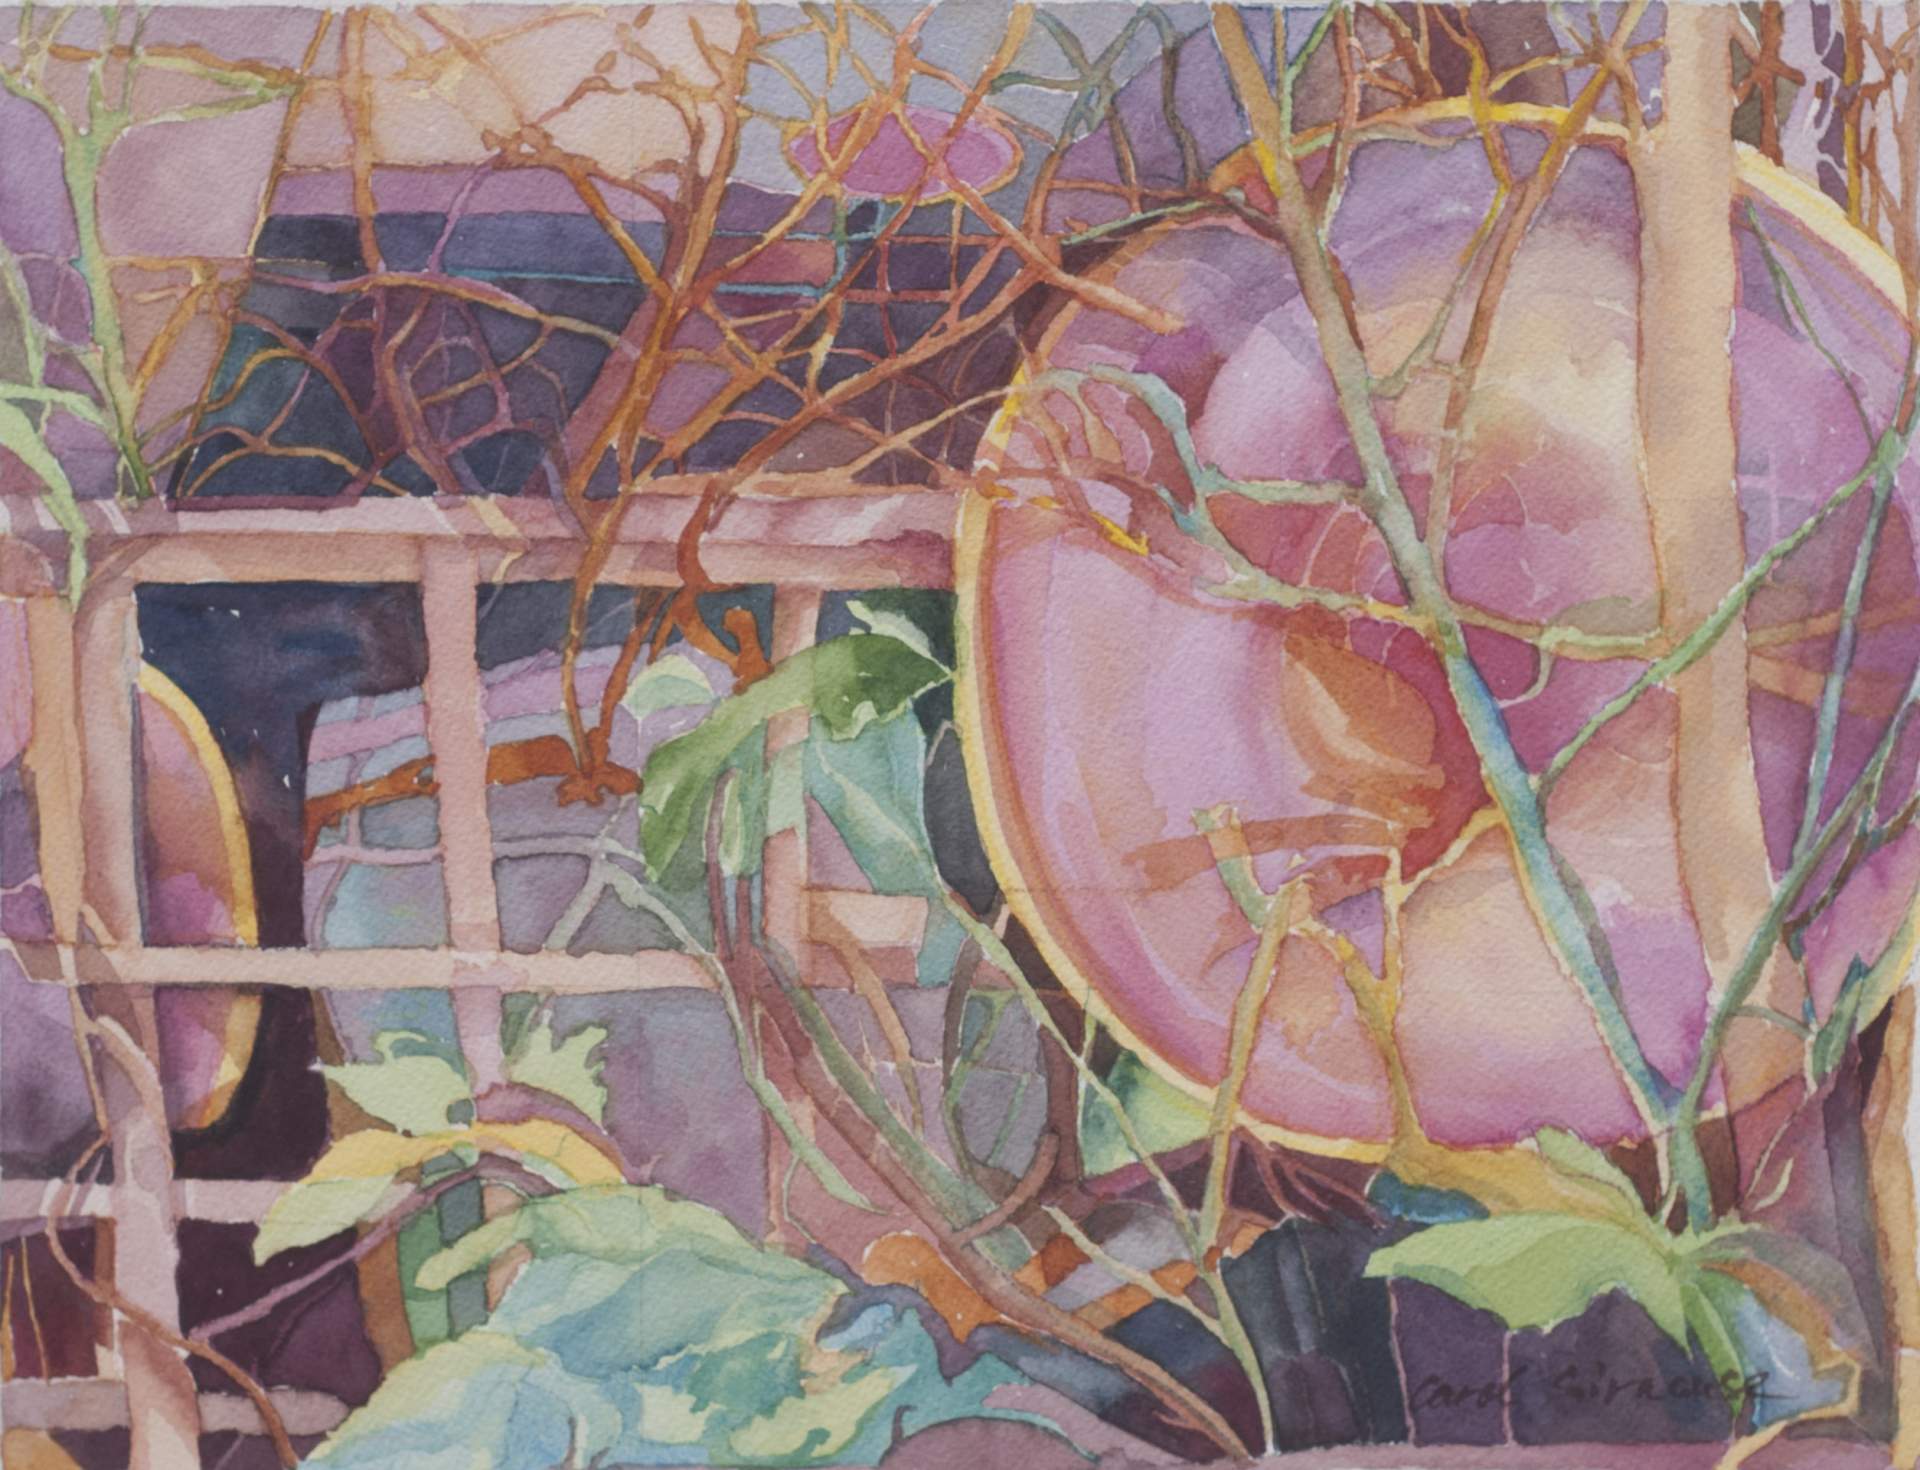 My Appreciation of Watercolor: A Personal View with Carol Case Siracuse